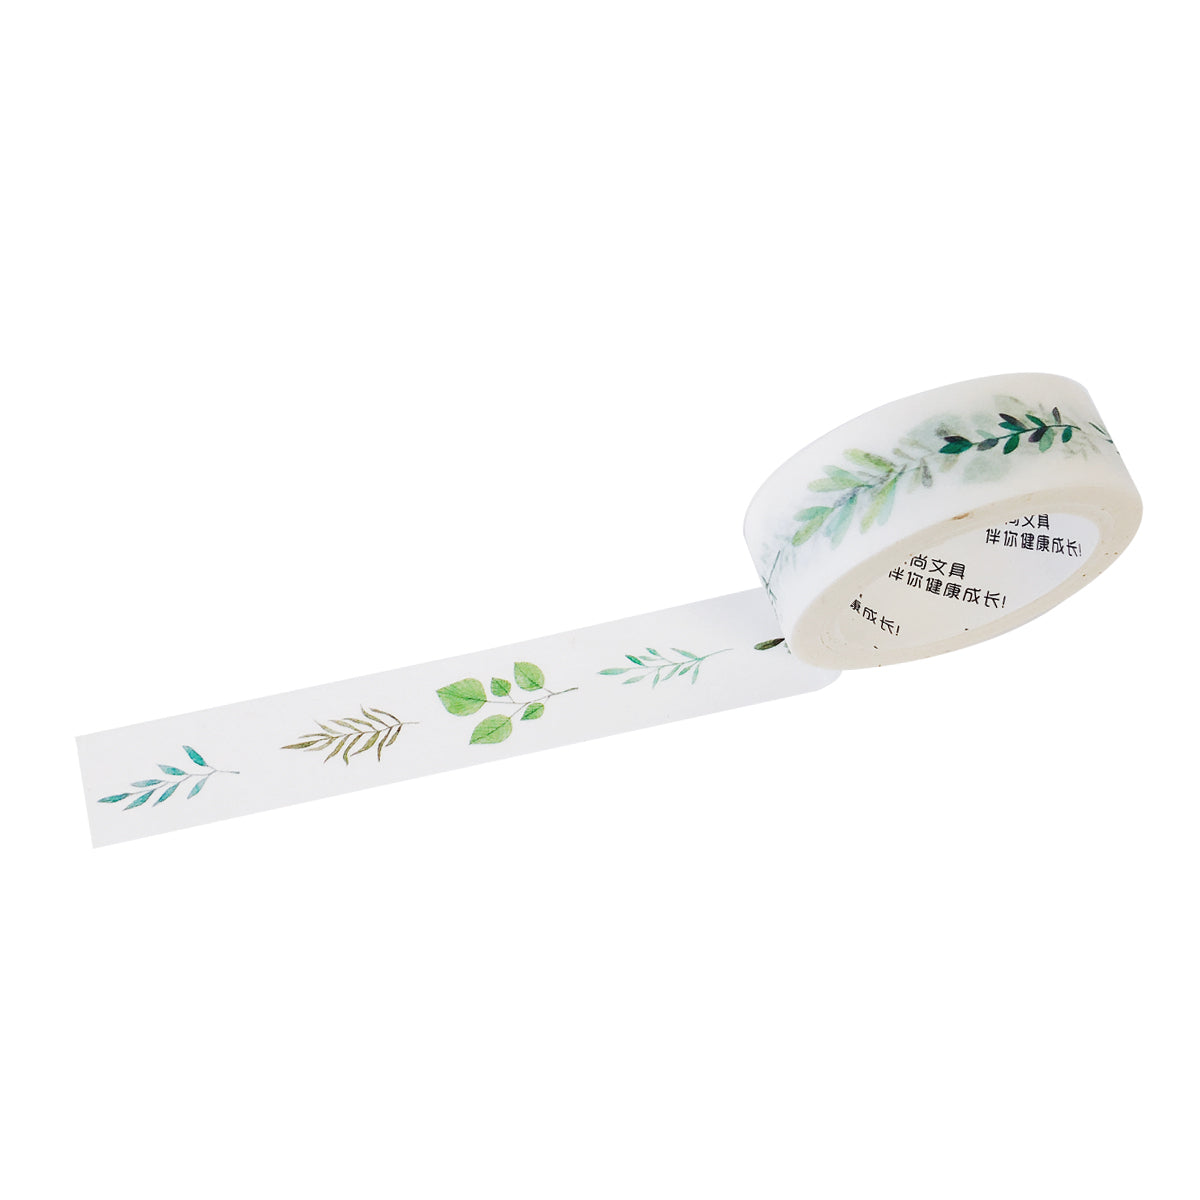 Wrapables Flowers and Greens Washi Masking Tape